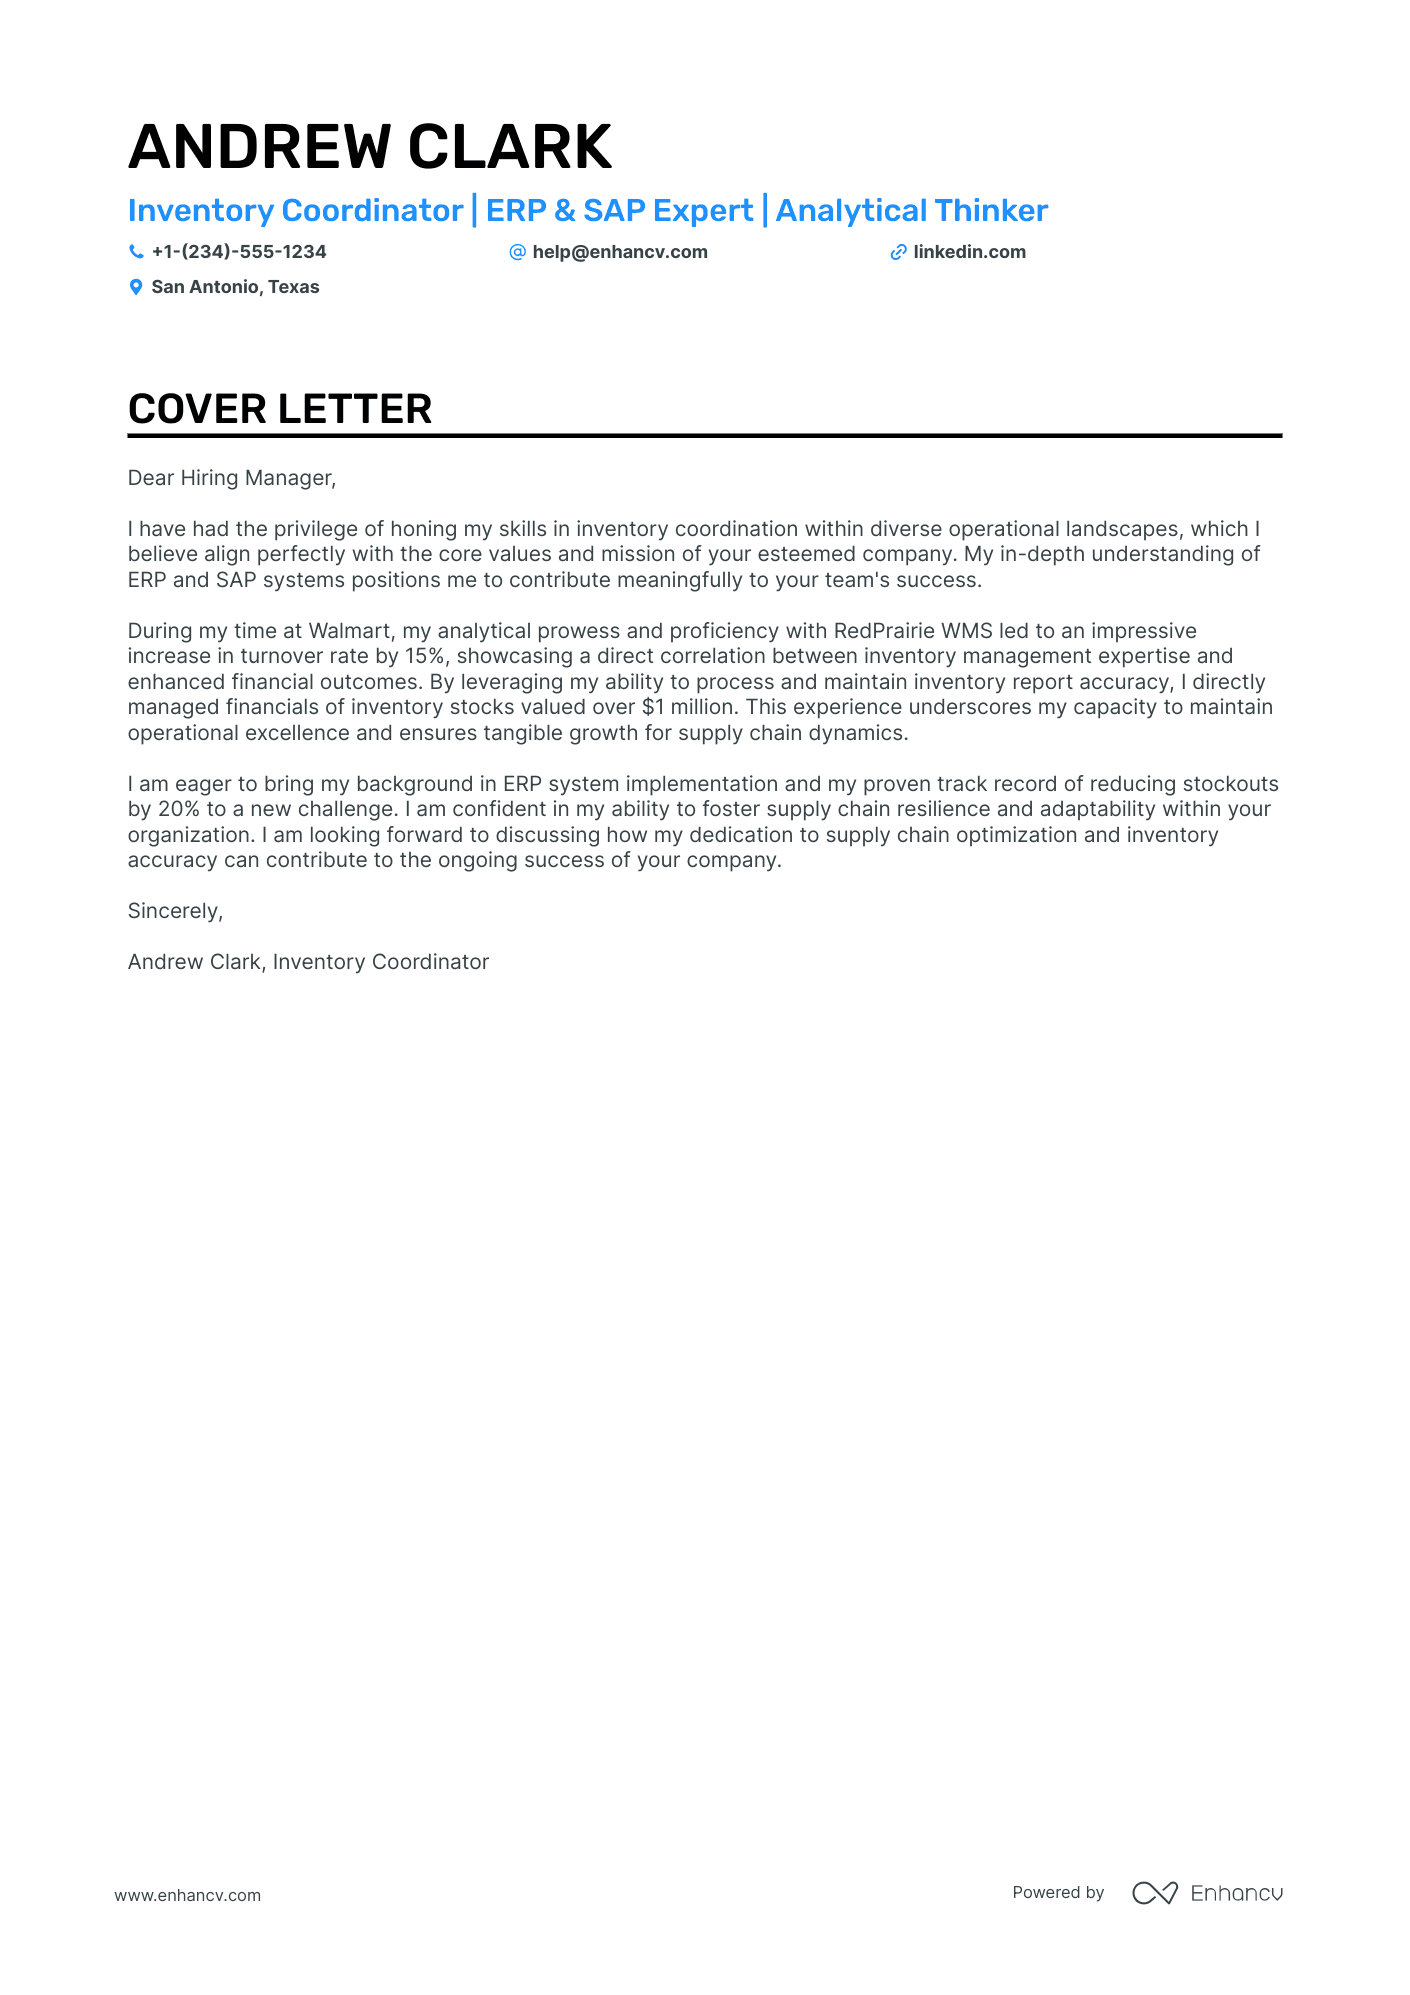 Inventory Coordinator cover letter